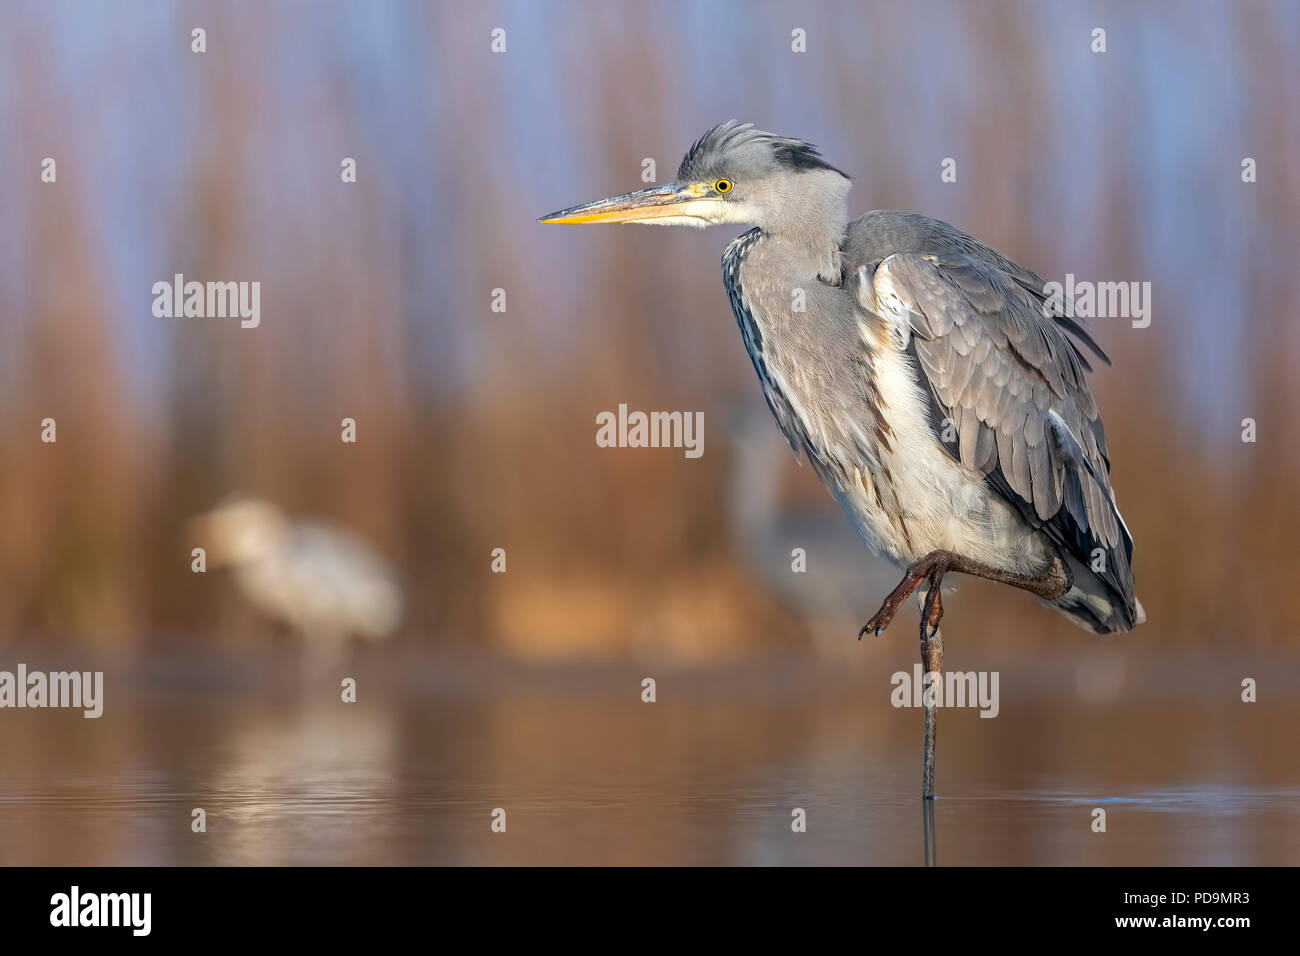 Grey heron or (Ardea cinerea) standing on one leg in the water, Kiskunság National Park, Hungary Stock Photo